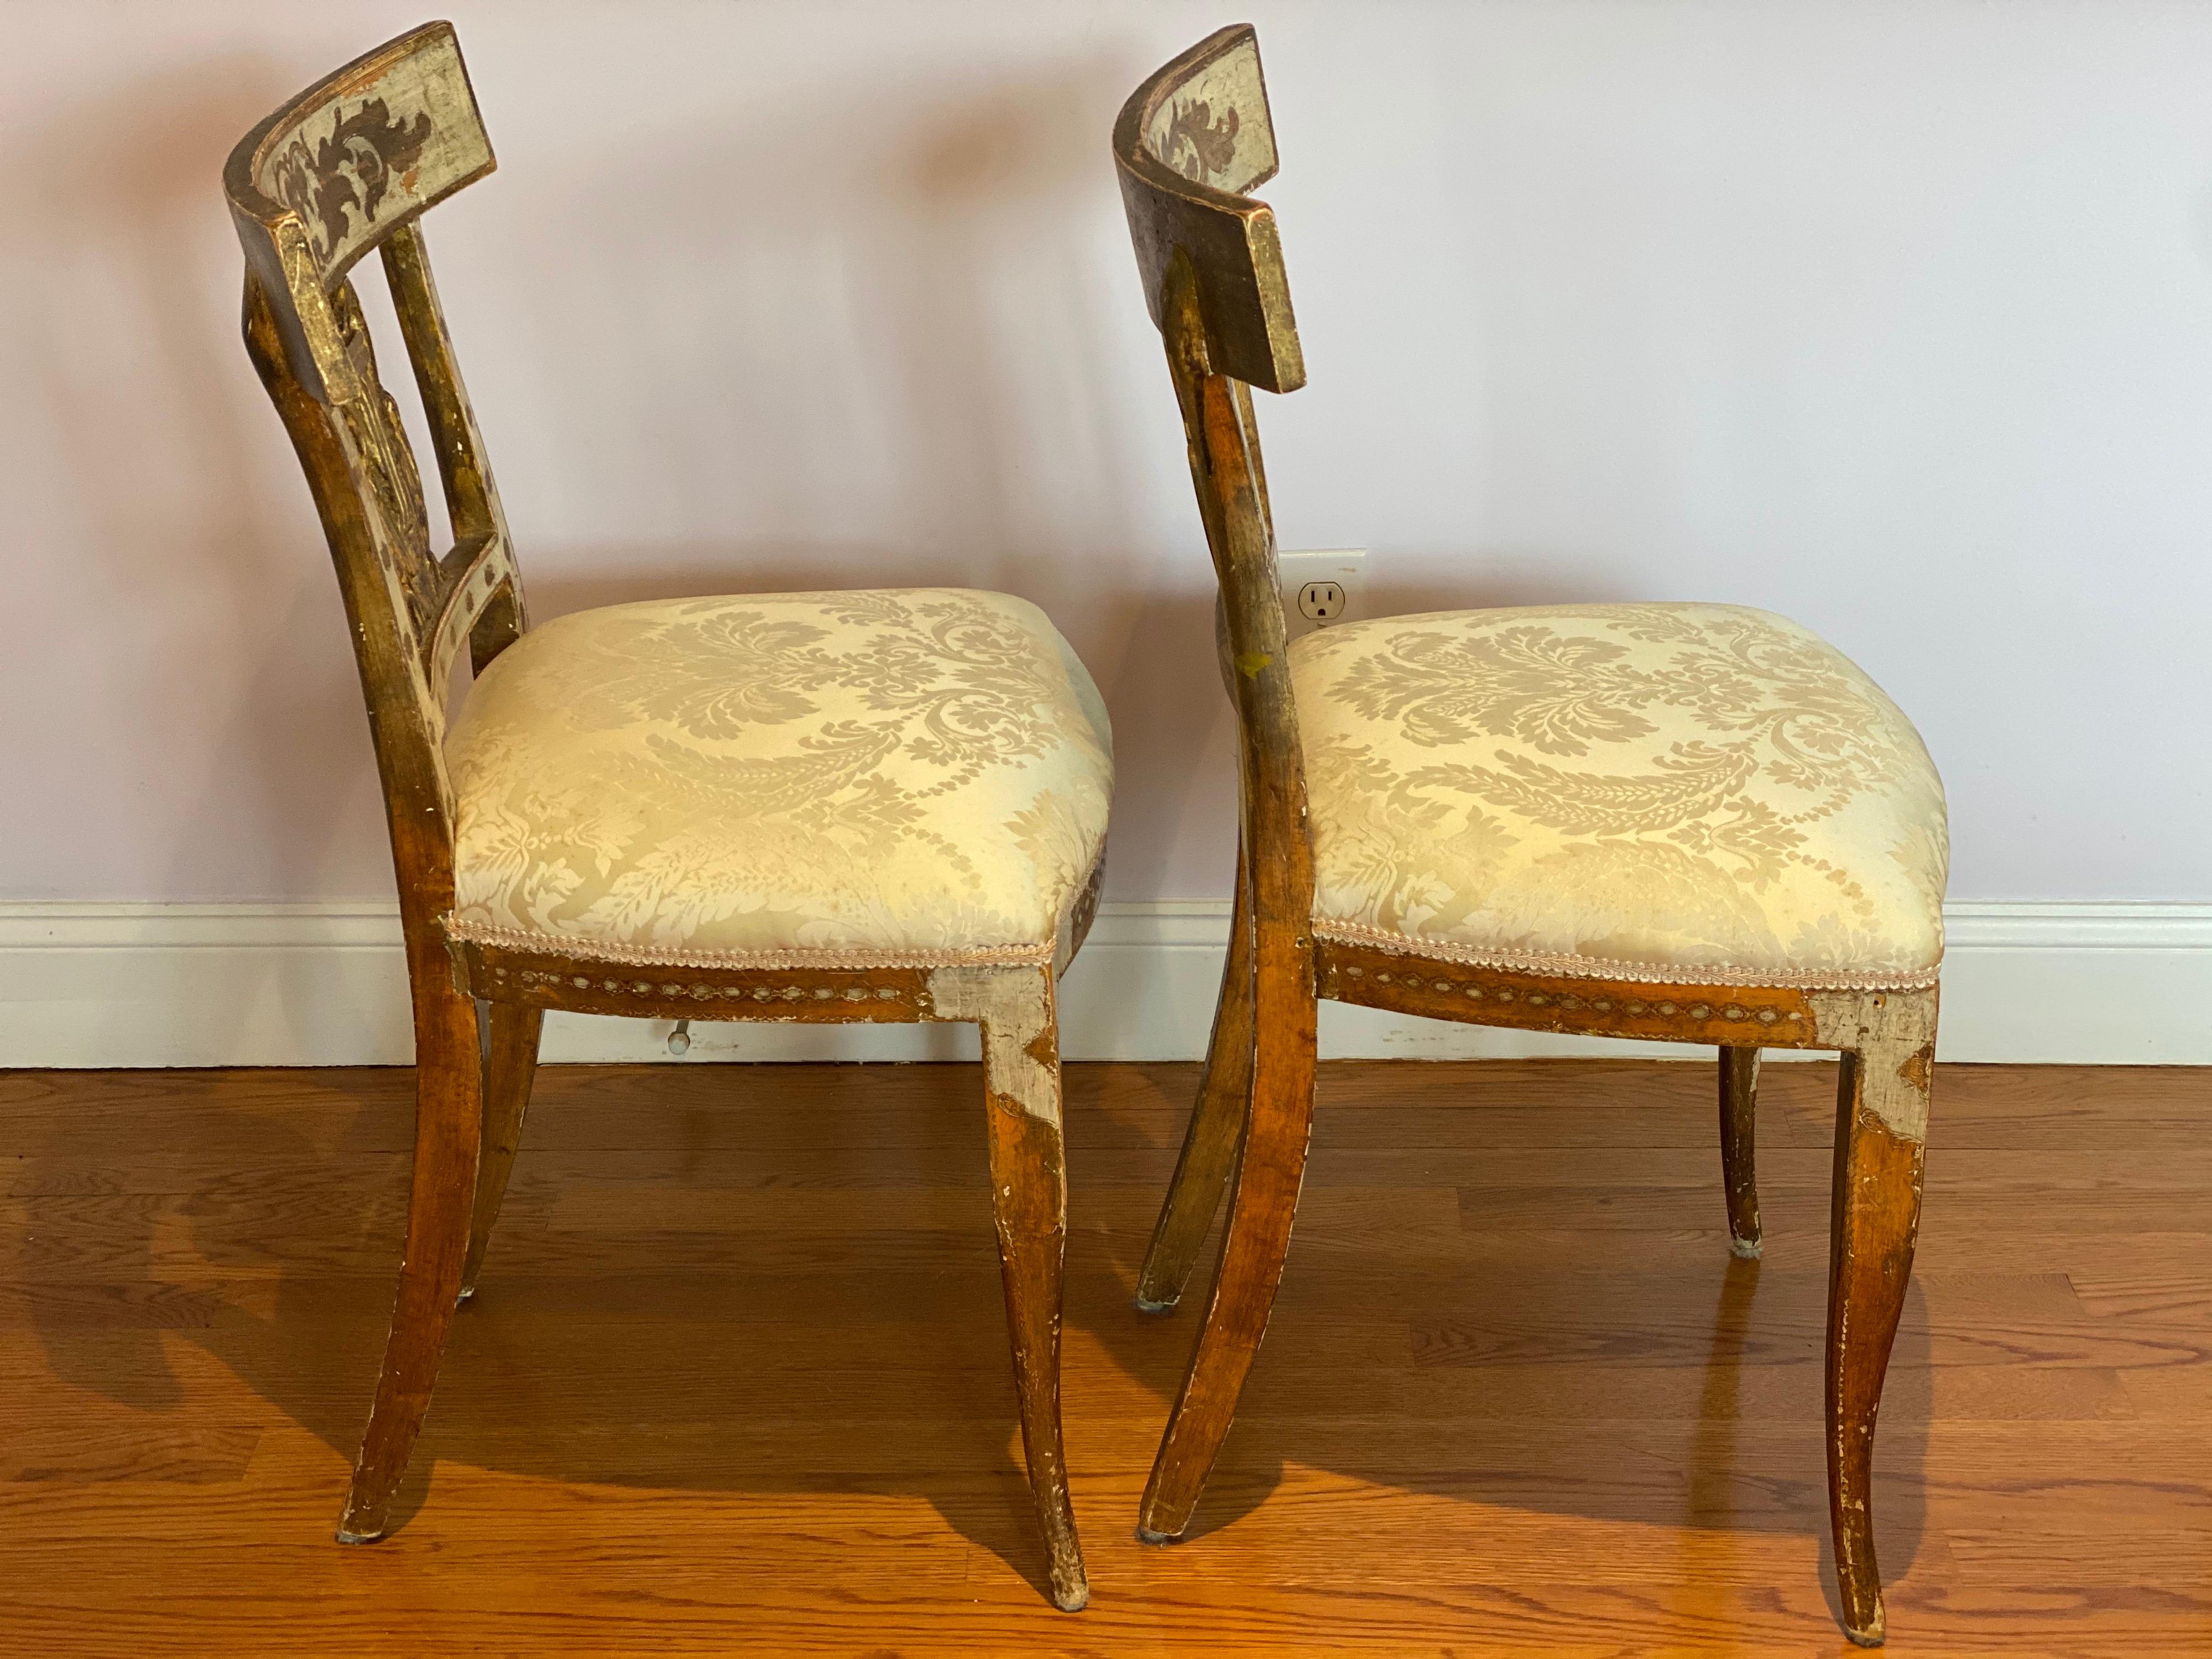 Pair of Italian Neoclassical Gilt-Wood Side Chairs with Swans and Lyres For Sale 1